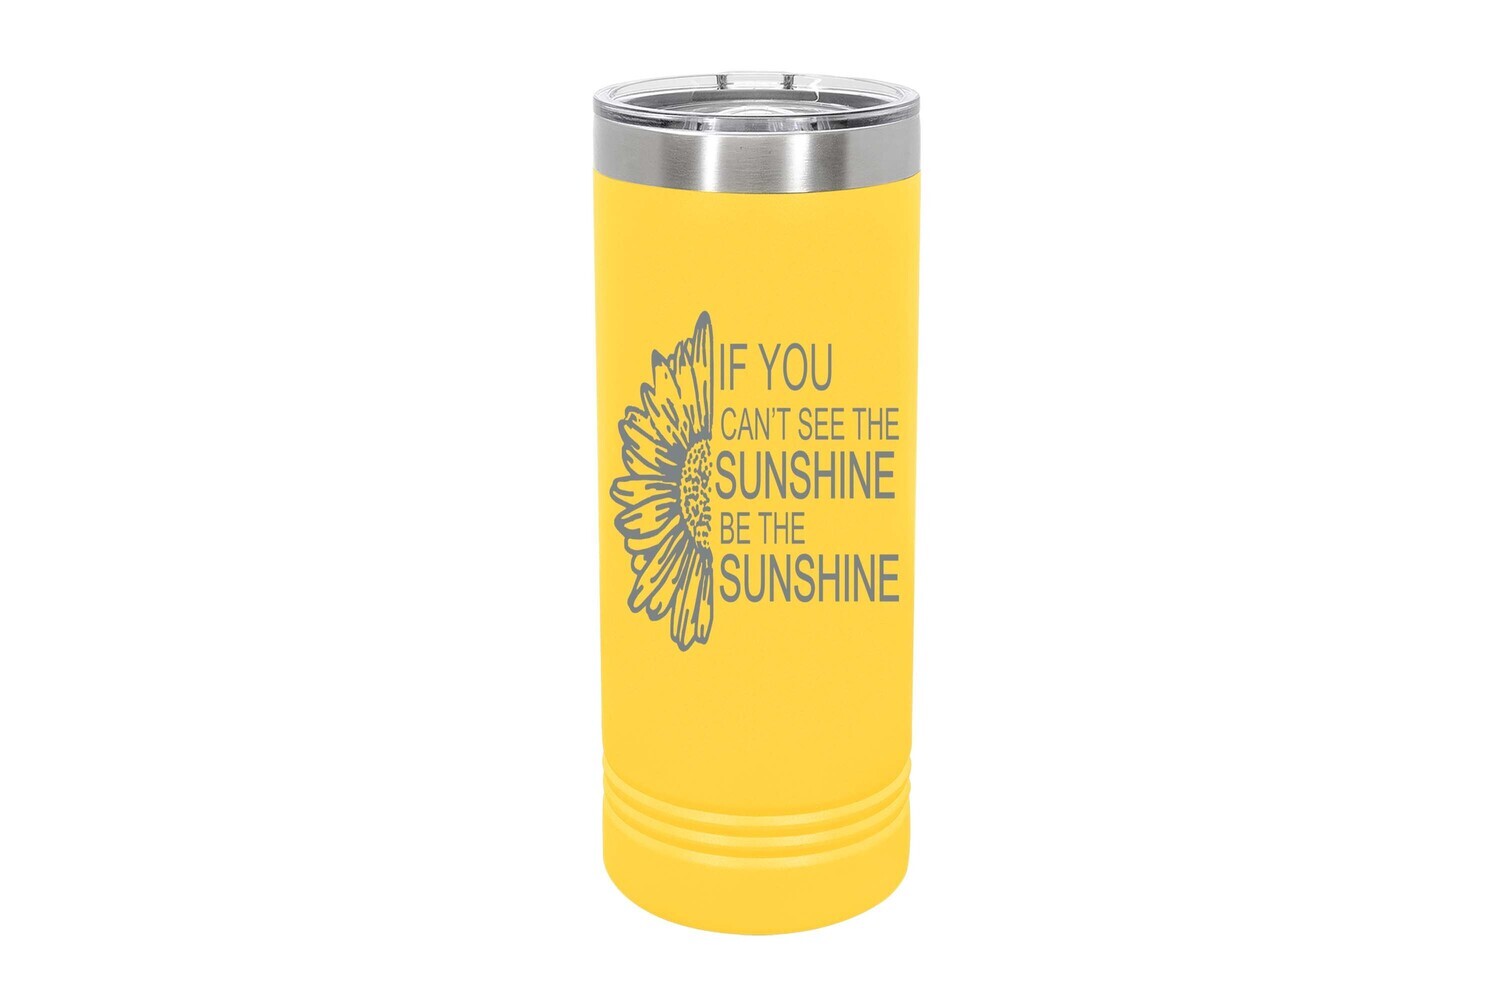 Skinny 22 oz If you can't see the sunshine be the Sunshine Insulated Tumbler